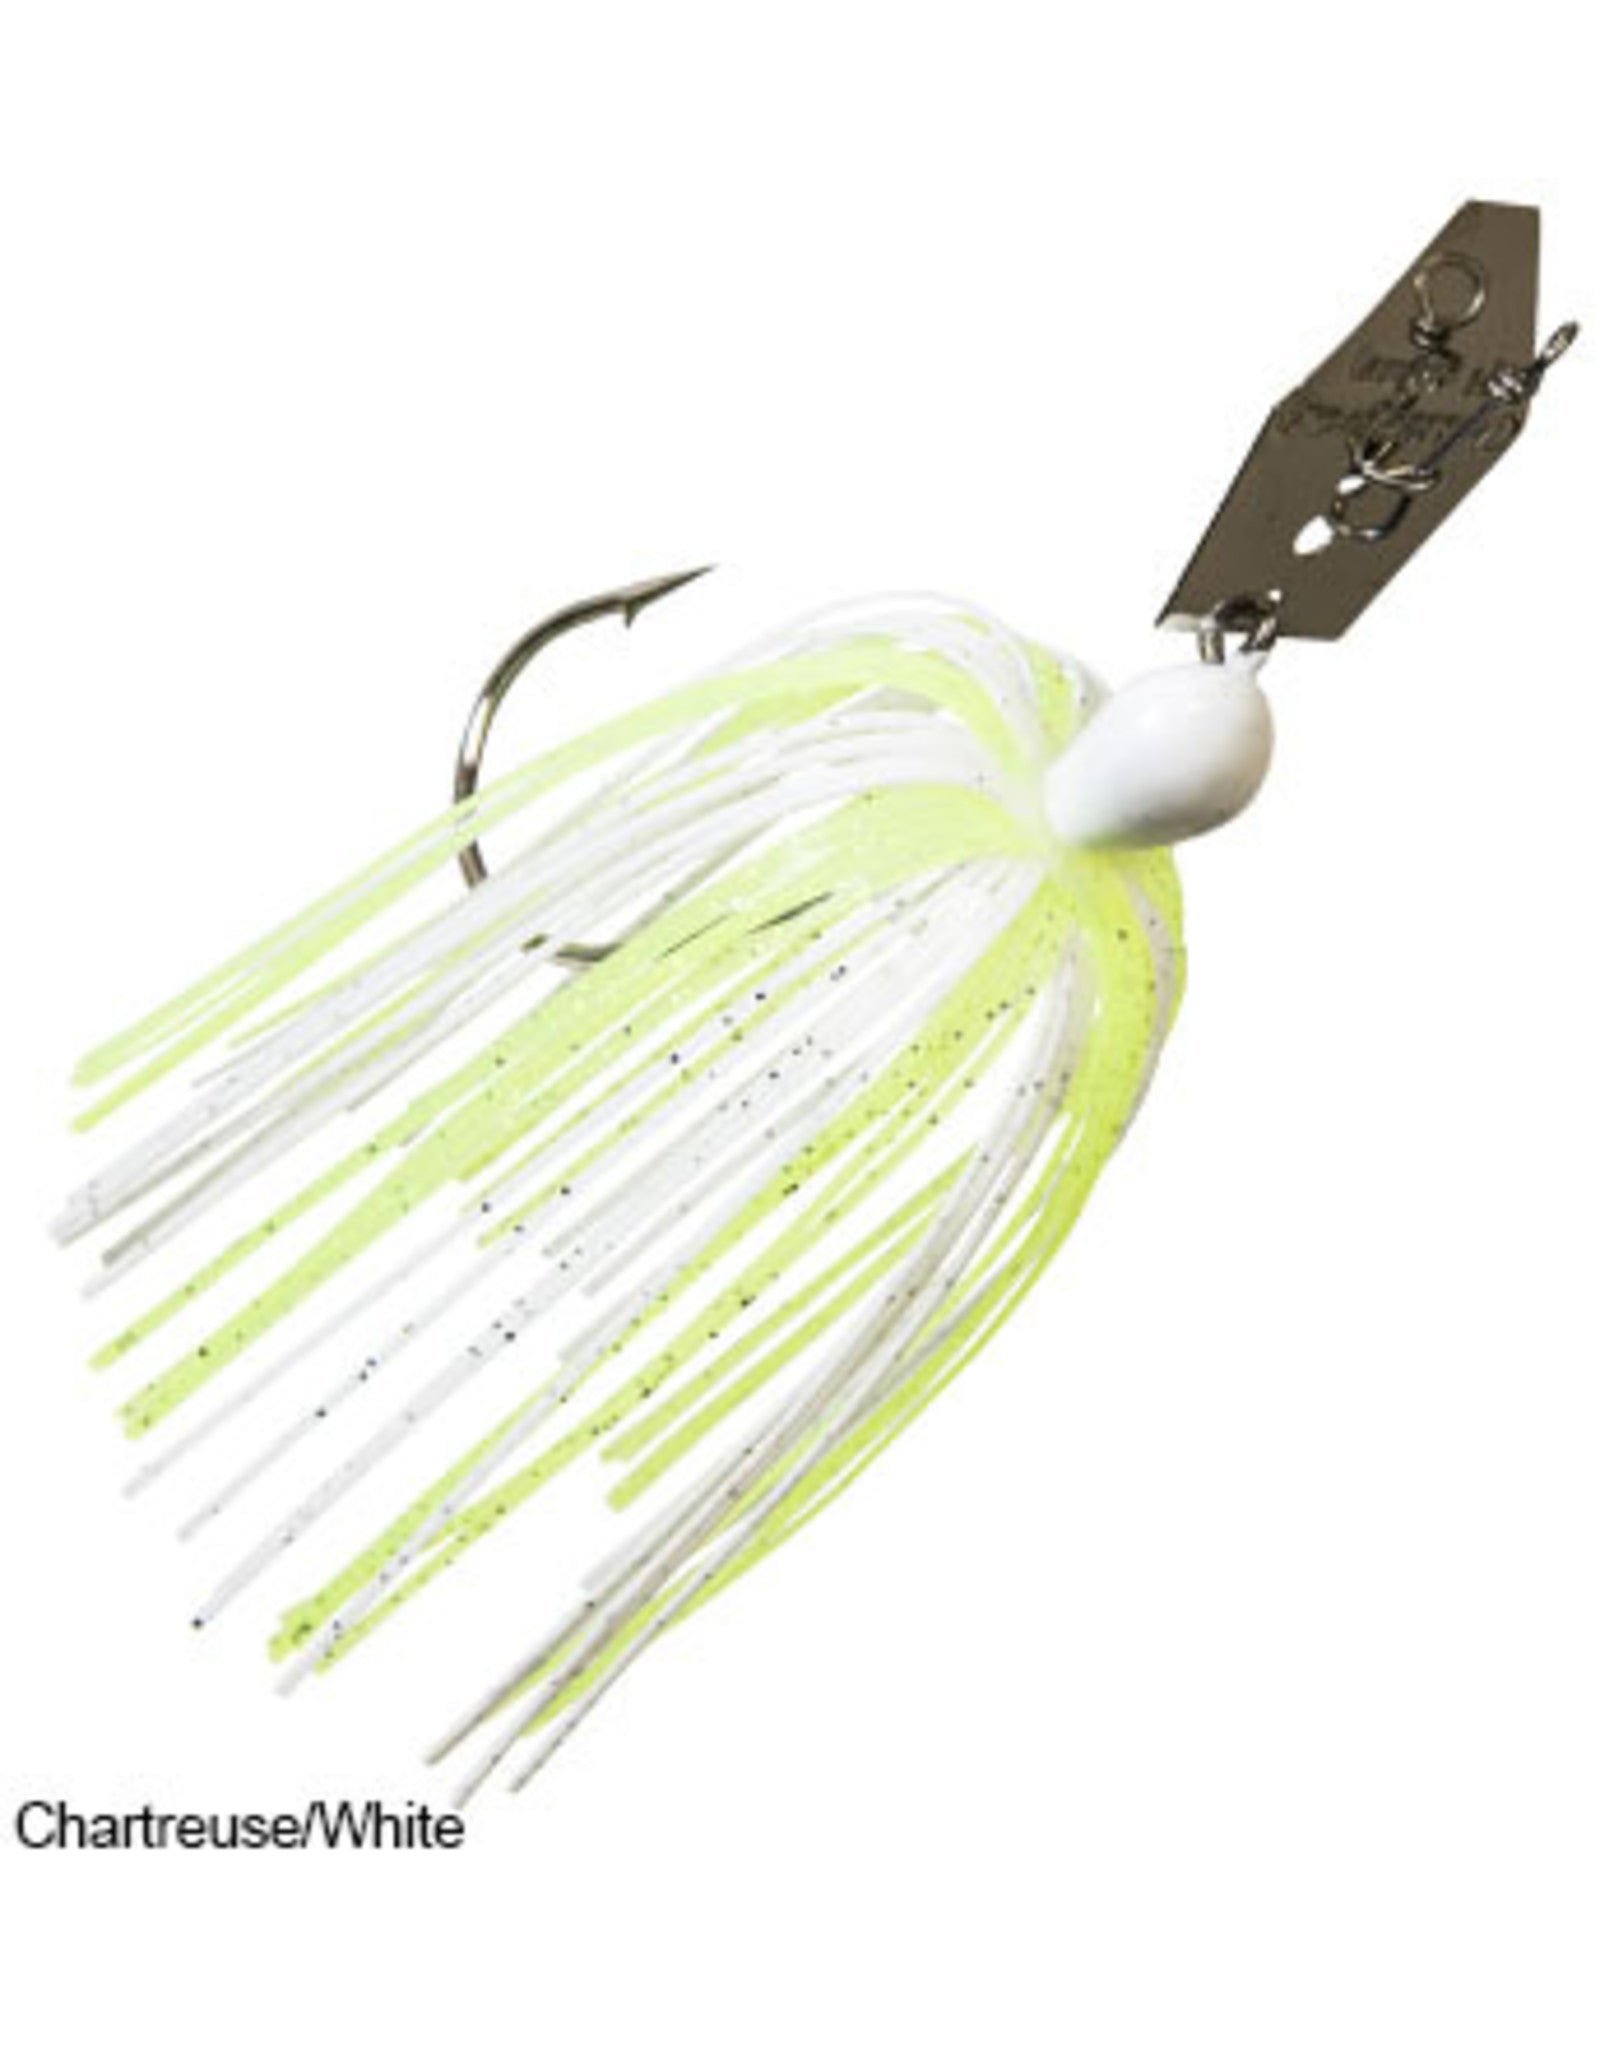 Product Review: Z-Man ChatterBaits